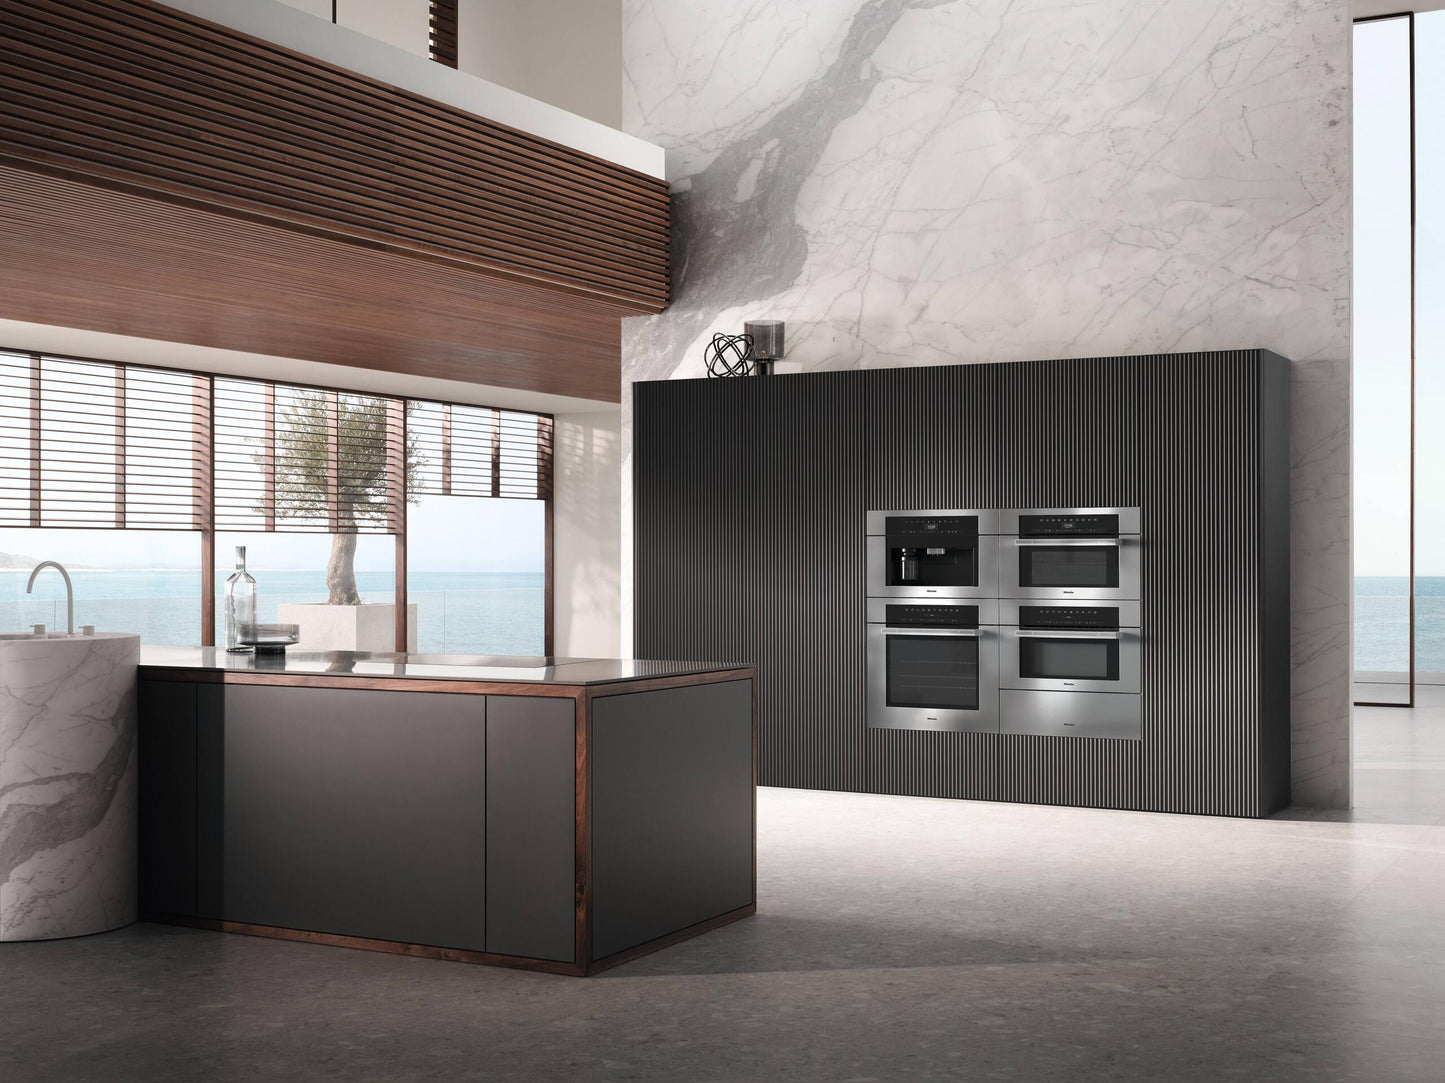 Miele CVA7370 STAINLESS STEEL   Built-In Coffee Machine In A Perfectly Combinable Design With Patented Cupsensor For Perfect Coffee.